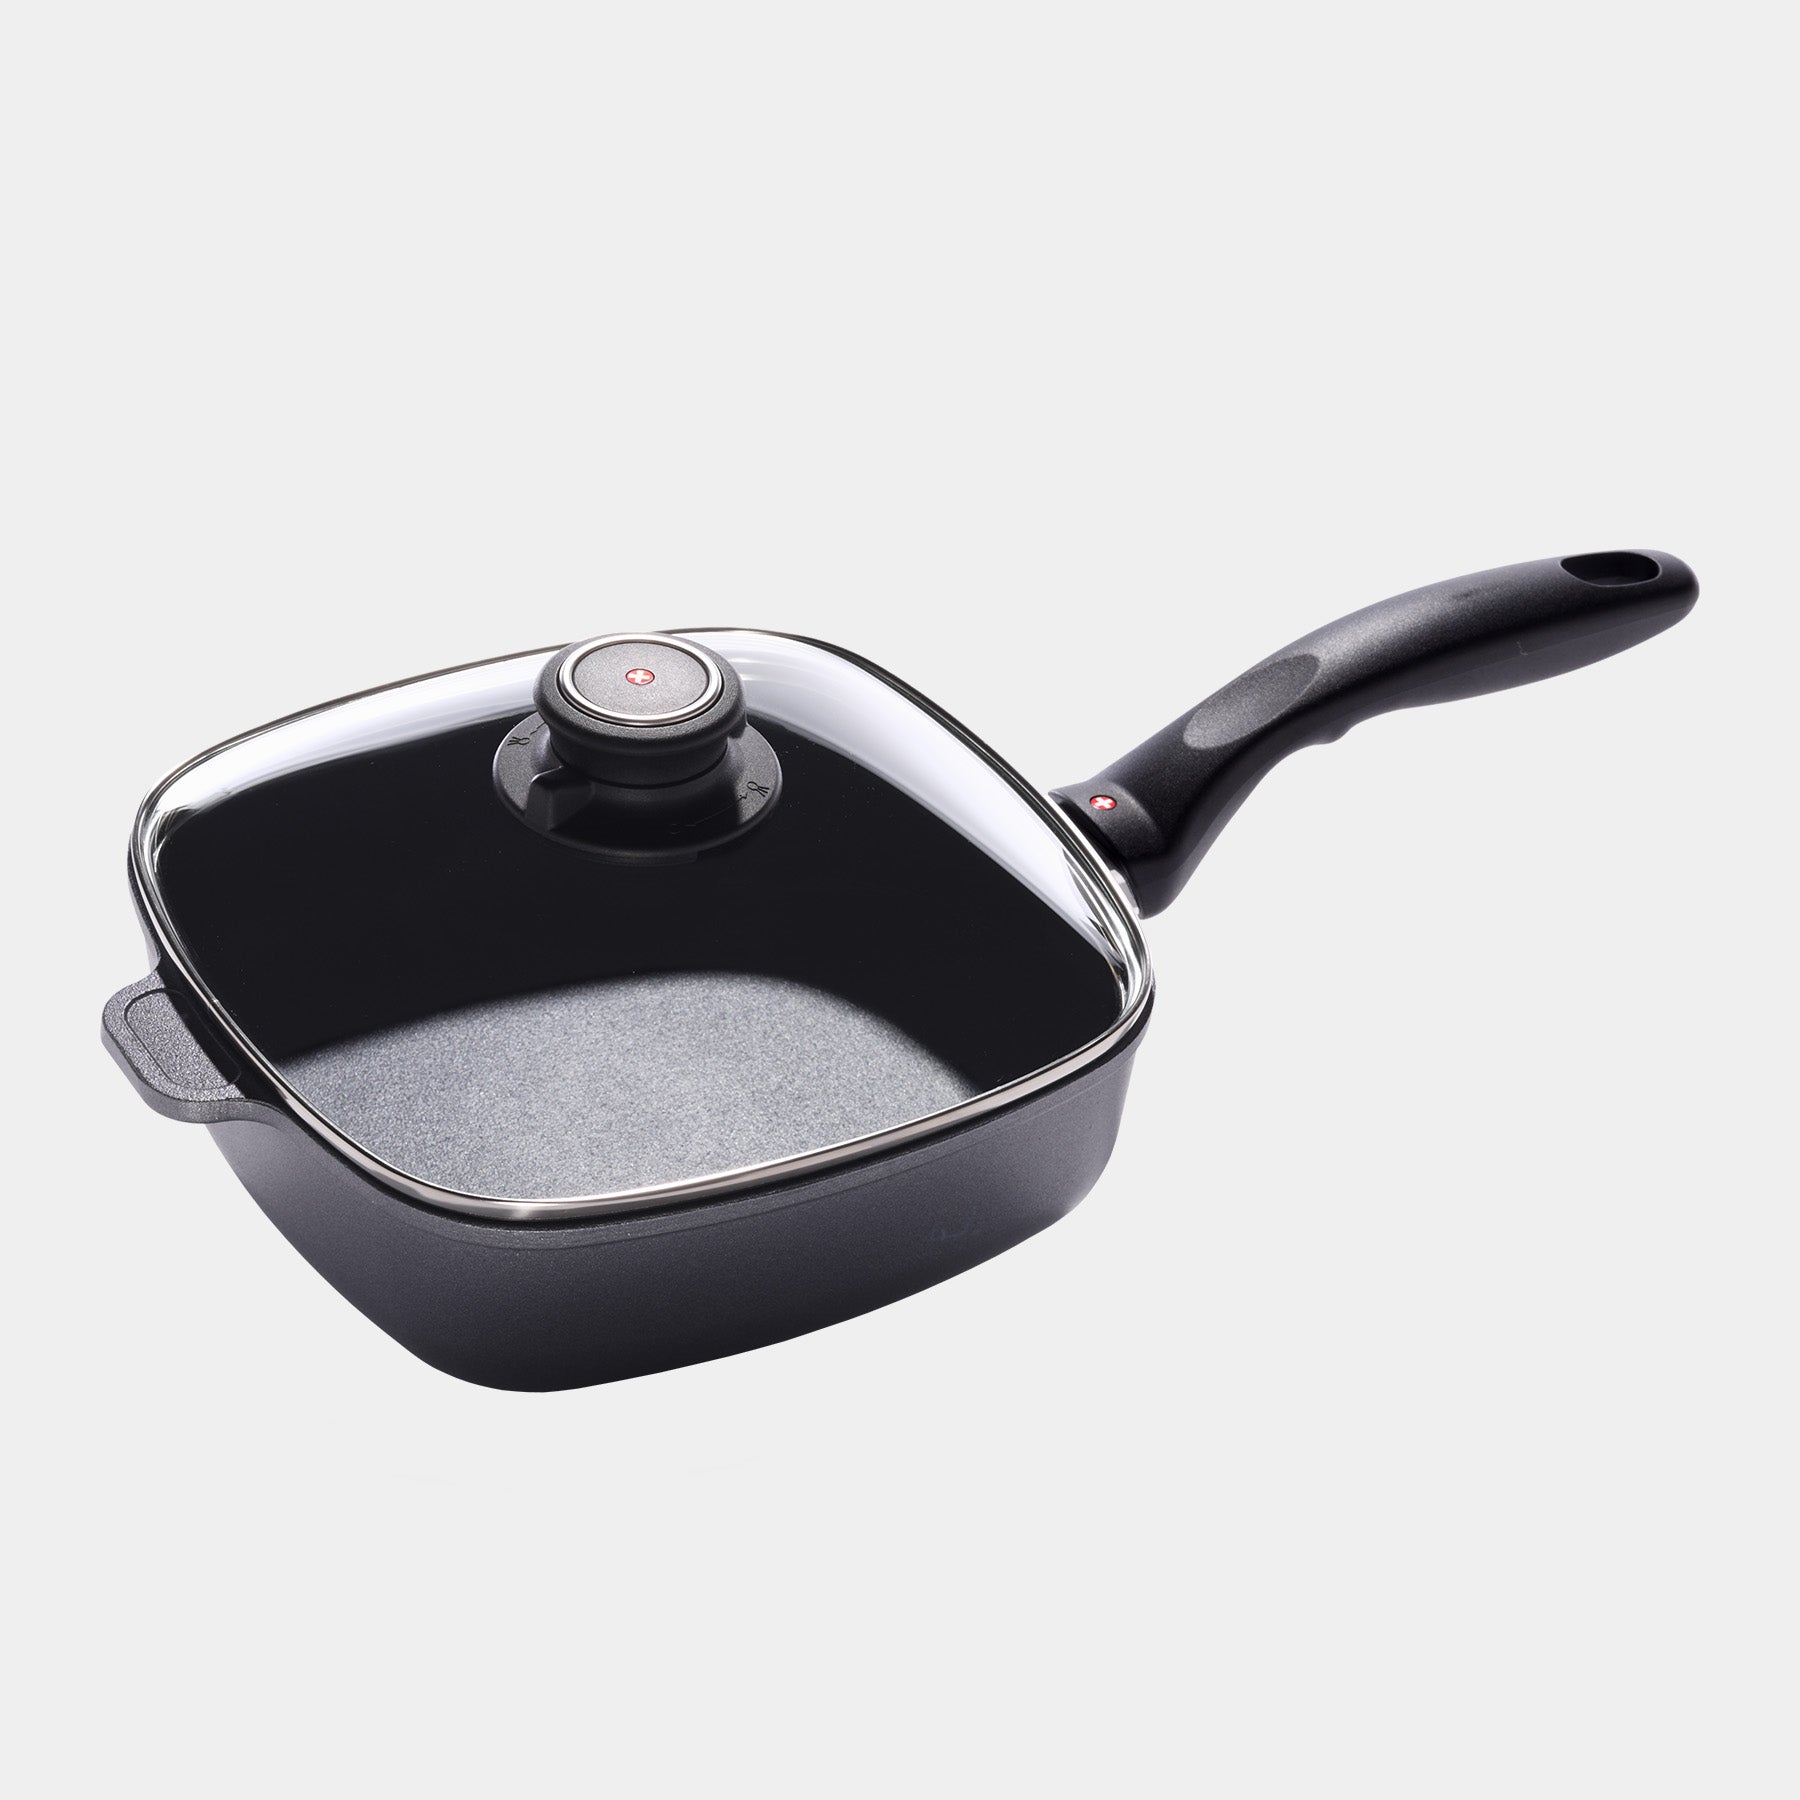 HD Nonstick 8" x 8" Square Saute Pan with Glass Lid